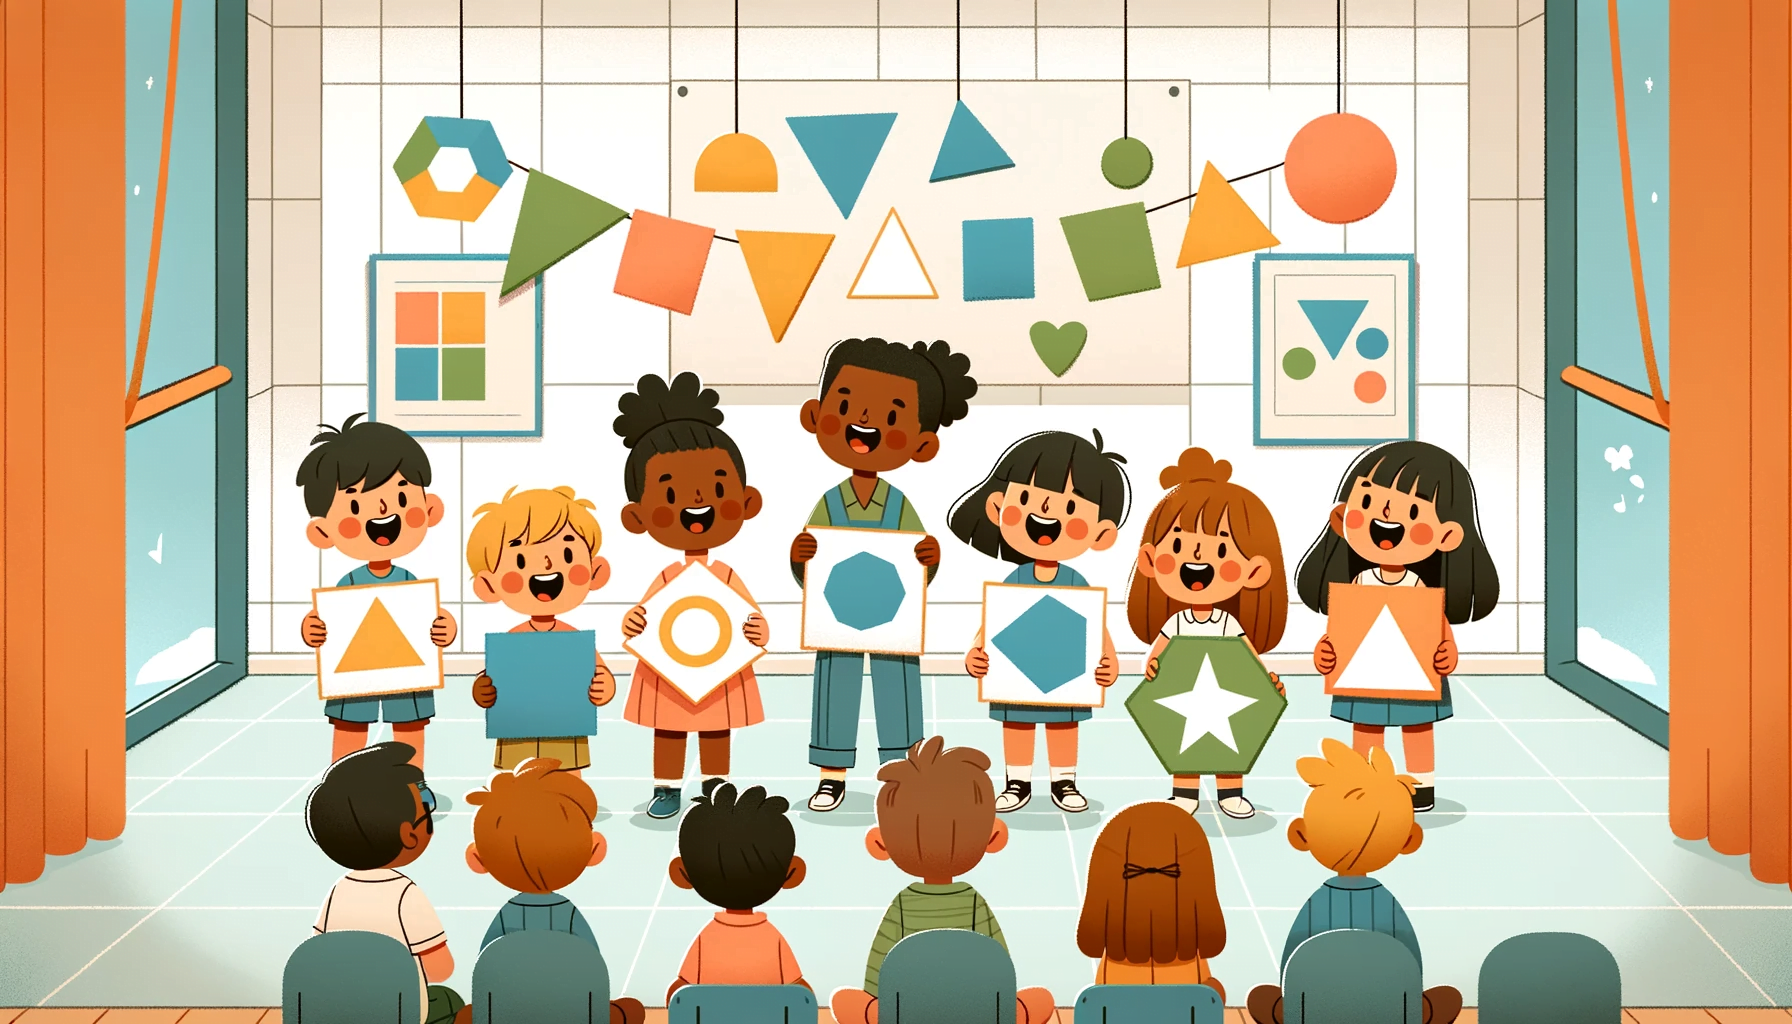 Illustration with clean and smooth line art showing preschool children from various ethnic backgrounds each holding a different large geometric shape cutout, like circles, squares, triangles, and hexagons. They are standing in a semi-circle, joyfully singing a shape-themed song in a classroom that has shape decorations hanging from the ceiling and shape posters on the walls.